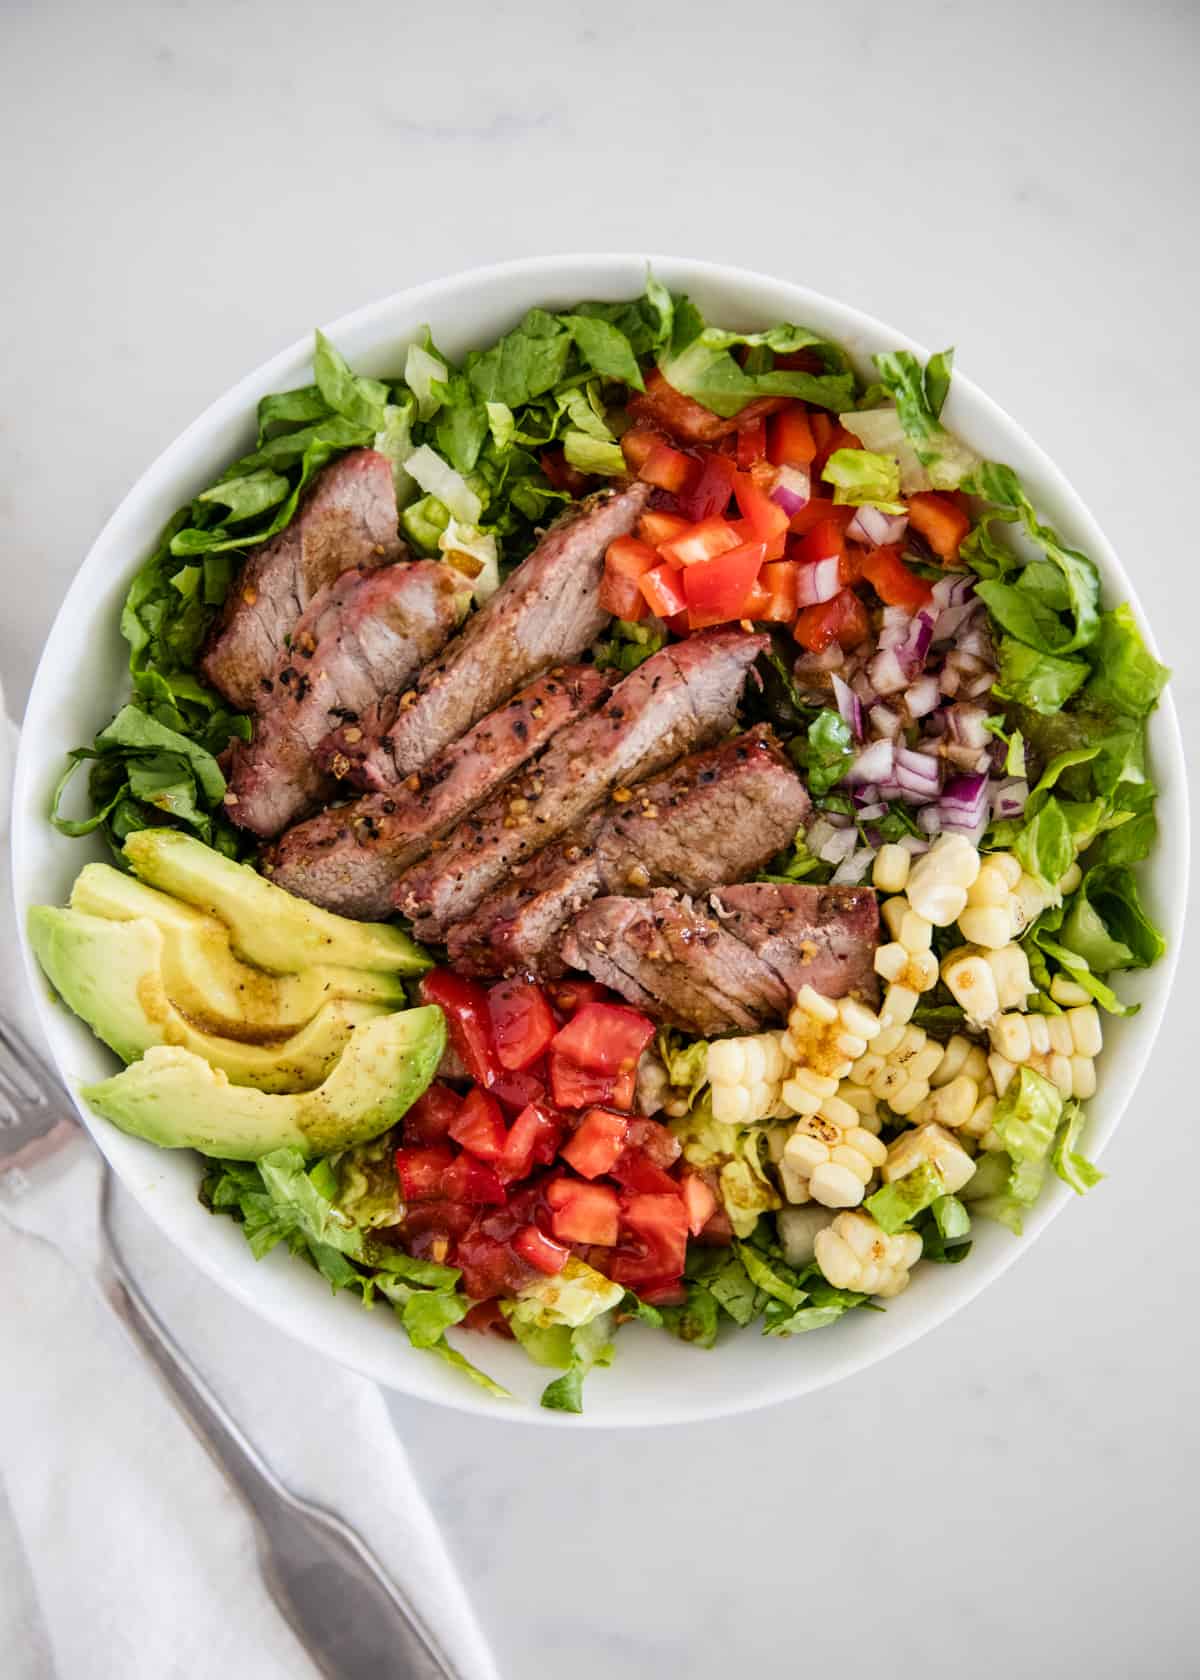 Steak salad with avocado in a white bowl.